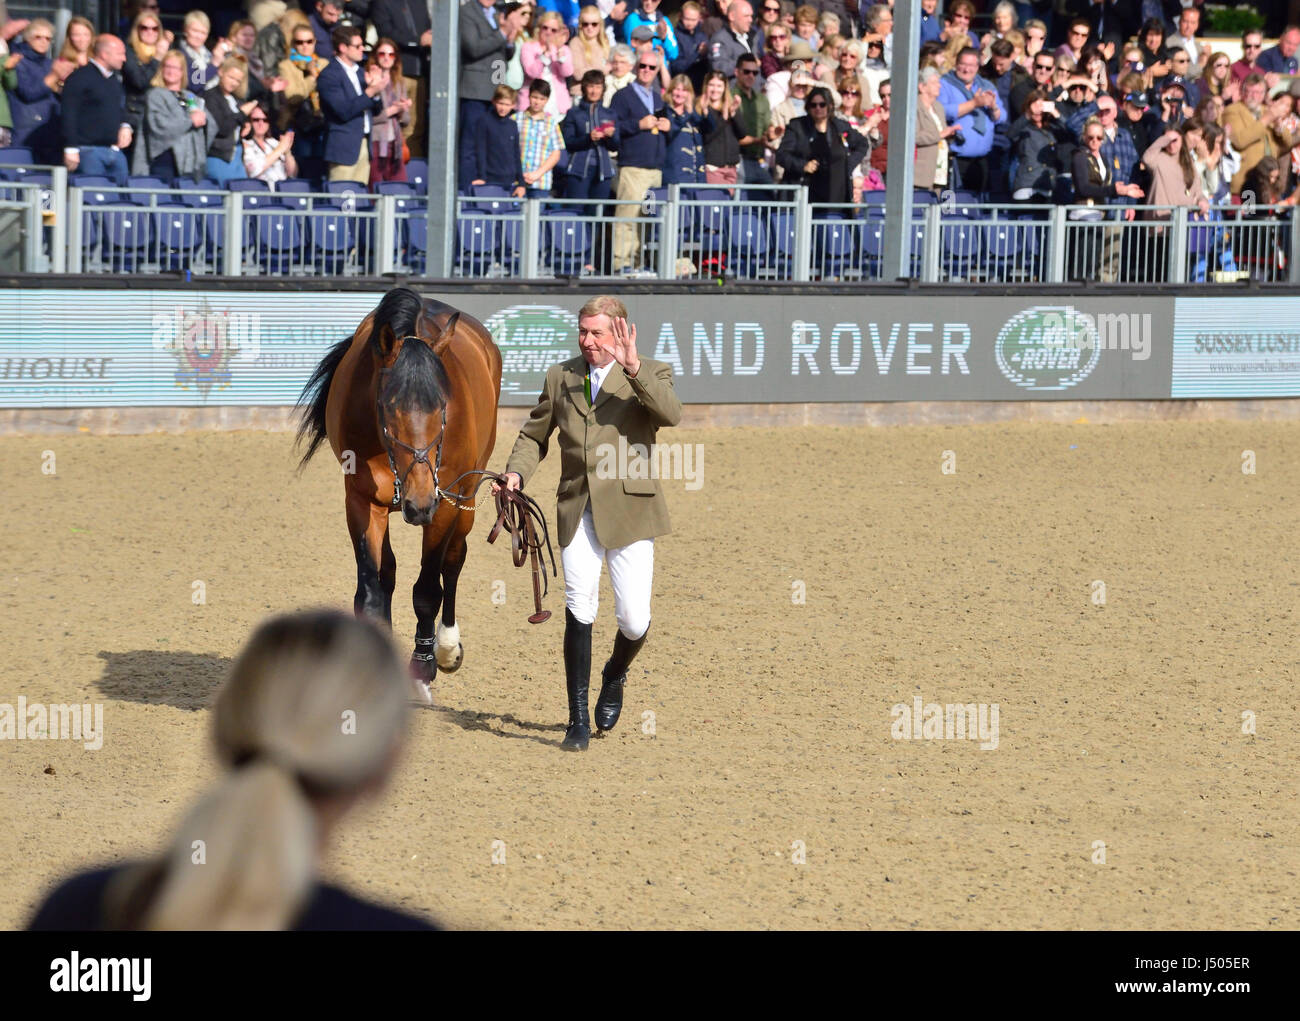 Windsor, Berkshire, UK. 14th May, 2017. The Retirement of Nick Skelton and Big Star  took place in the Castle Arena today  . Big Star, with whom Skelton has attended two Olympic Games, walked around the arena on the final day of the Royal Windsor Horse Show o Credit Gary Blake/Alamy Live News Stock Photo